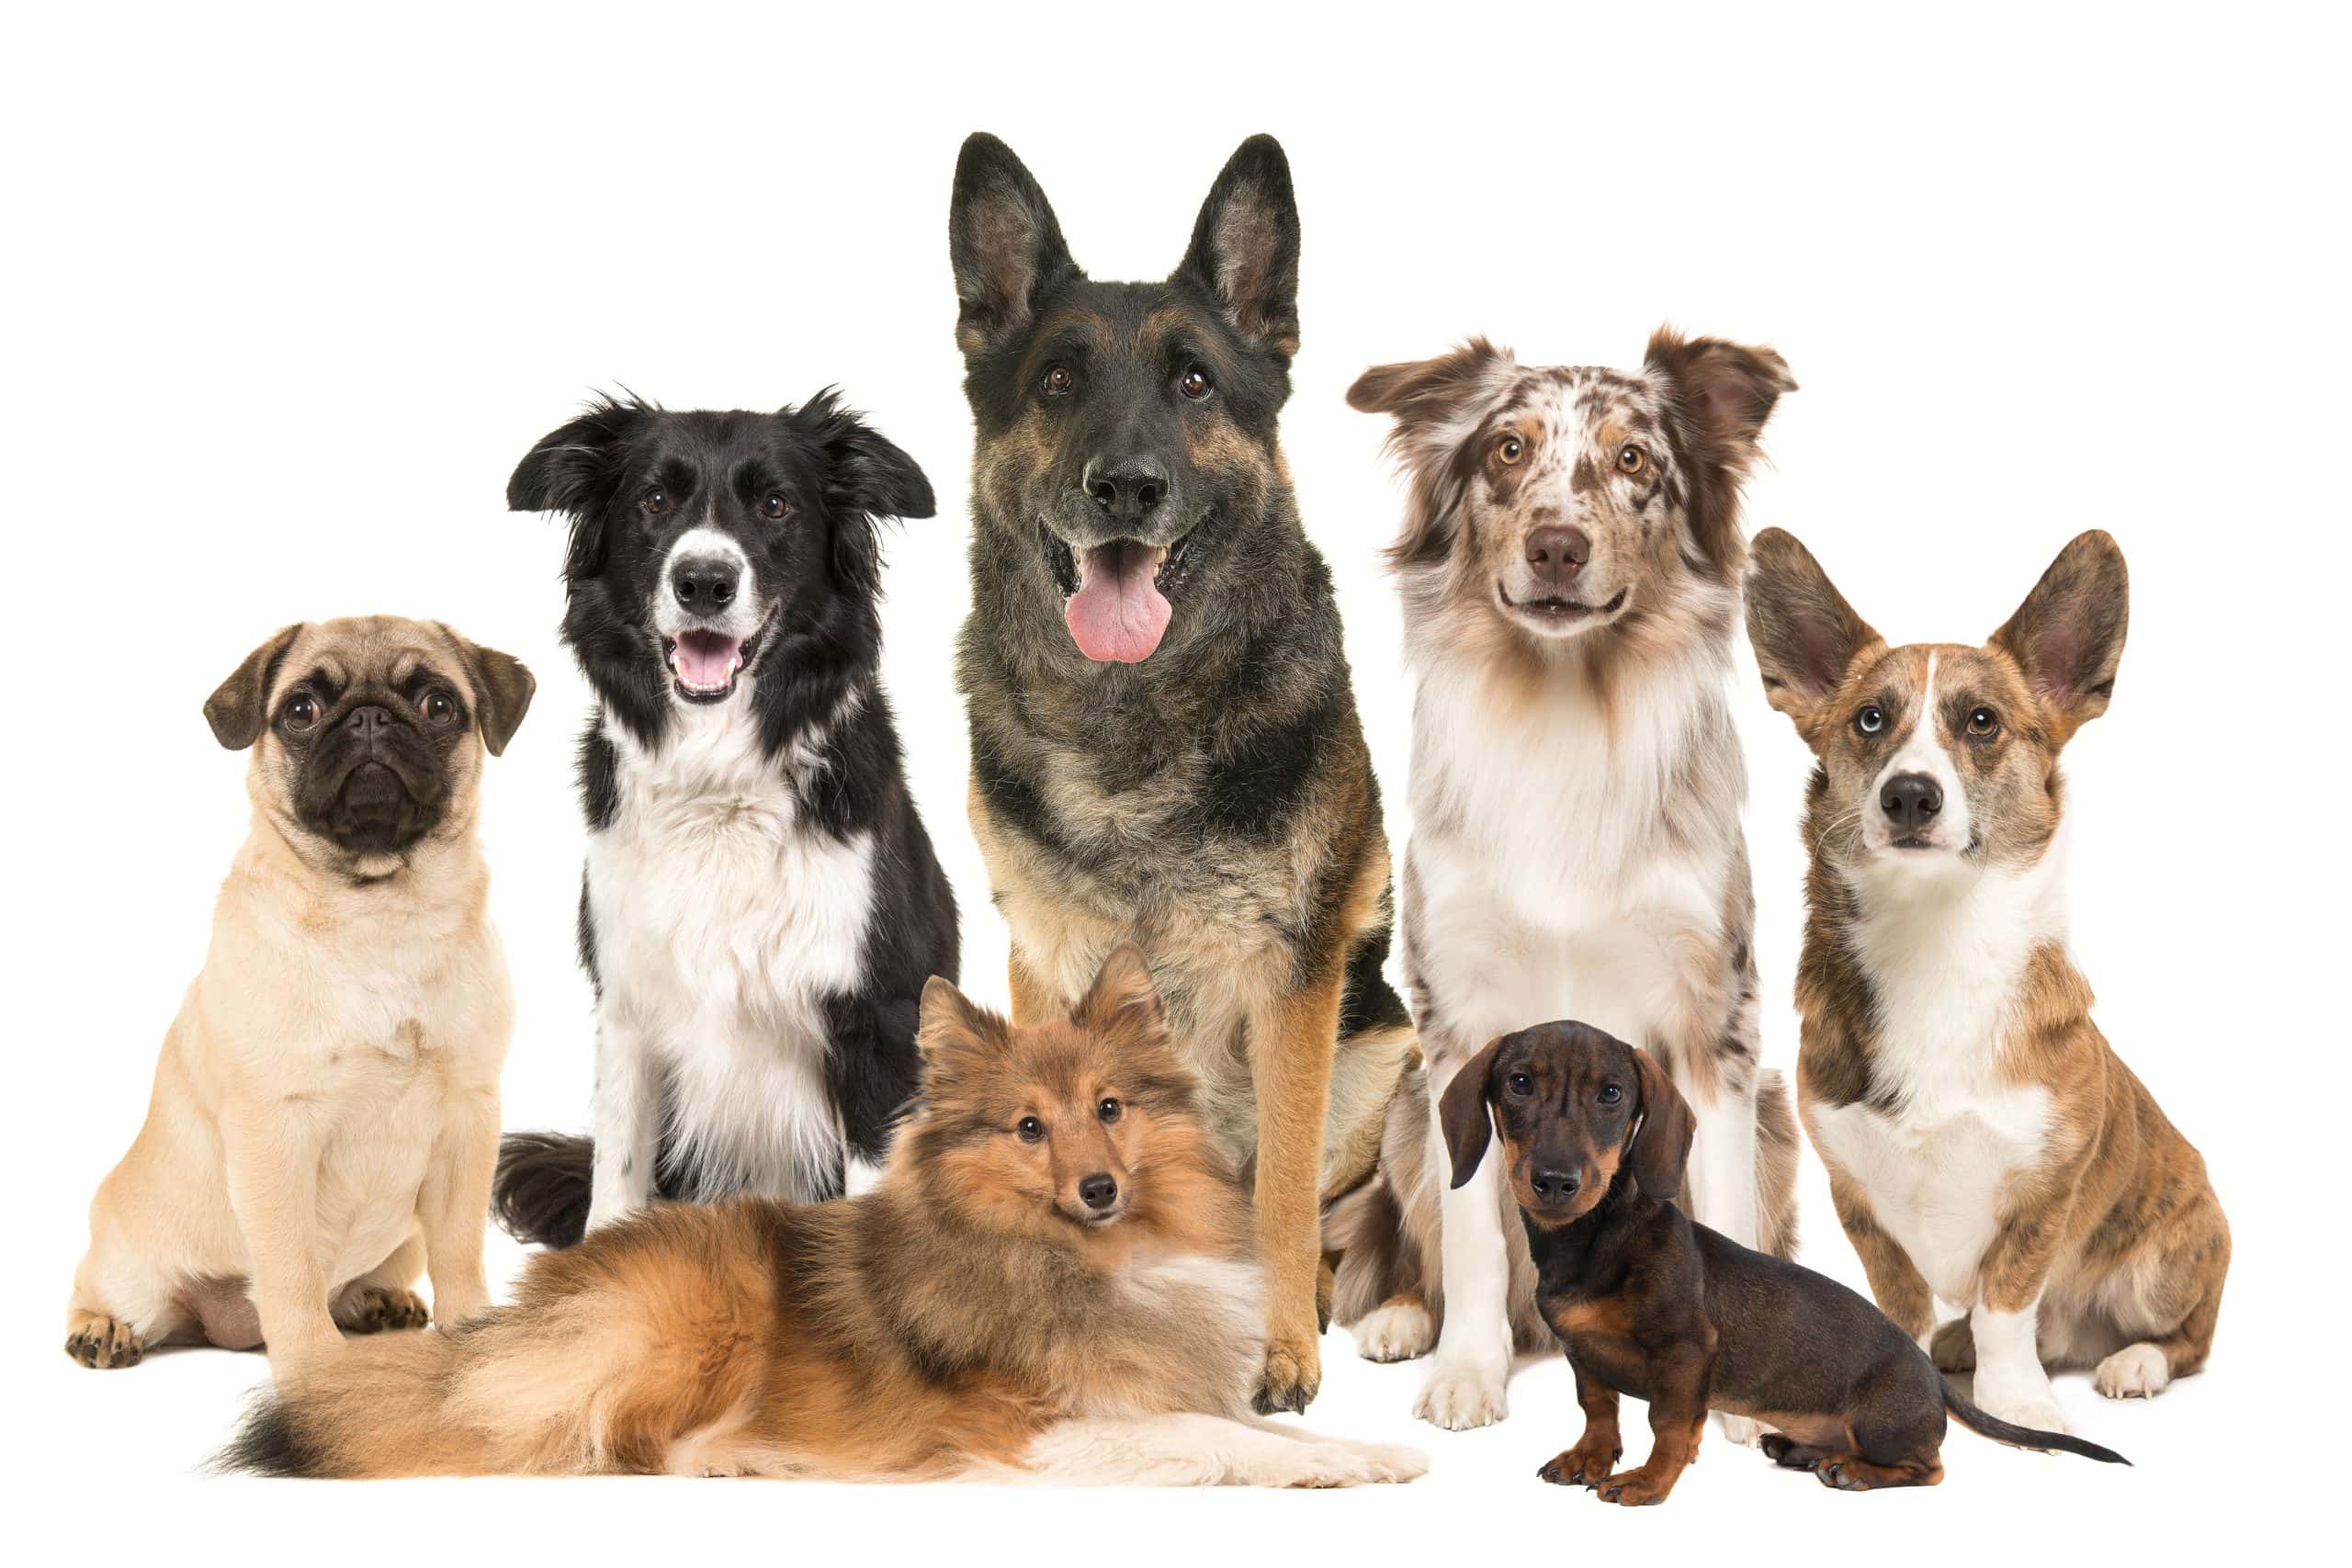 Tips For Identifying Your Dog’s Breed(s)